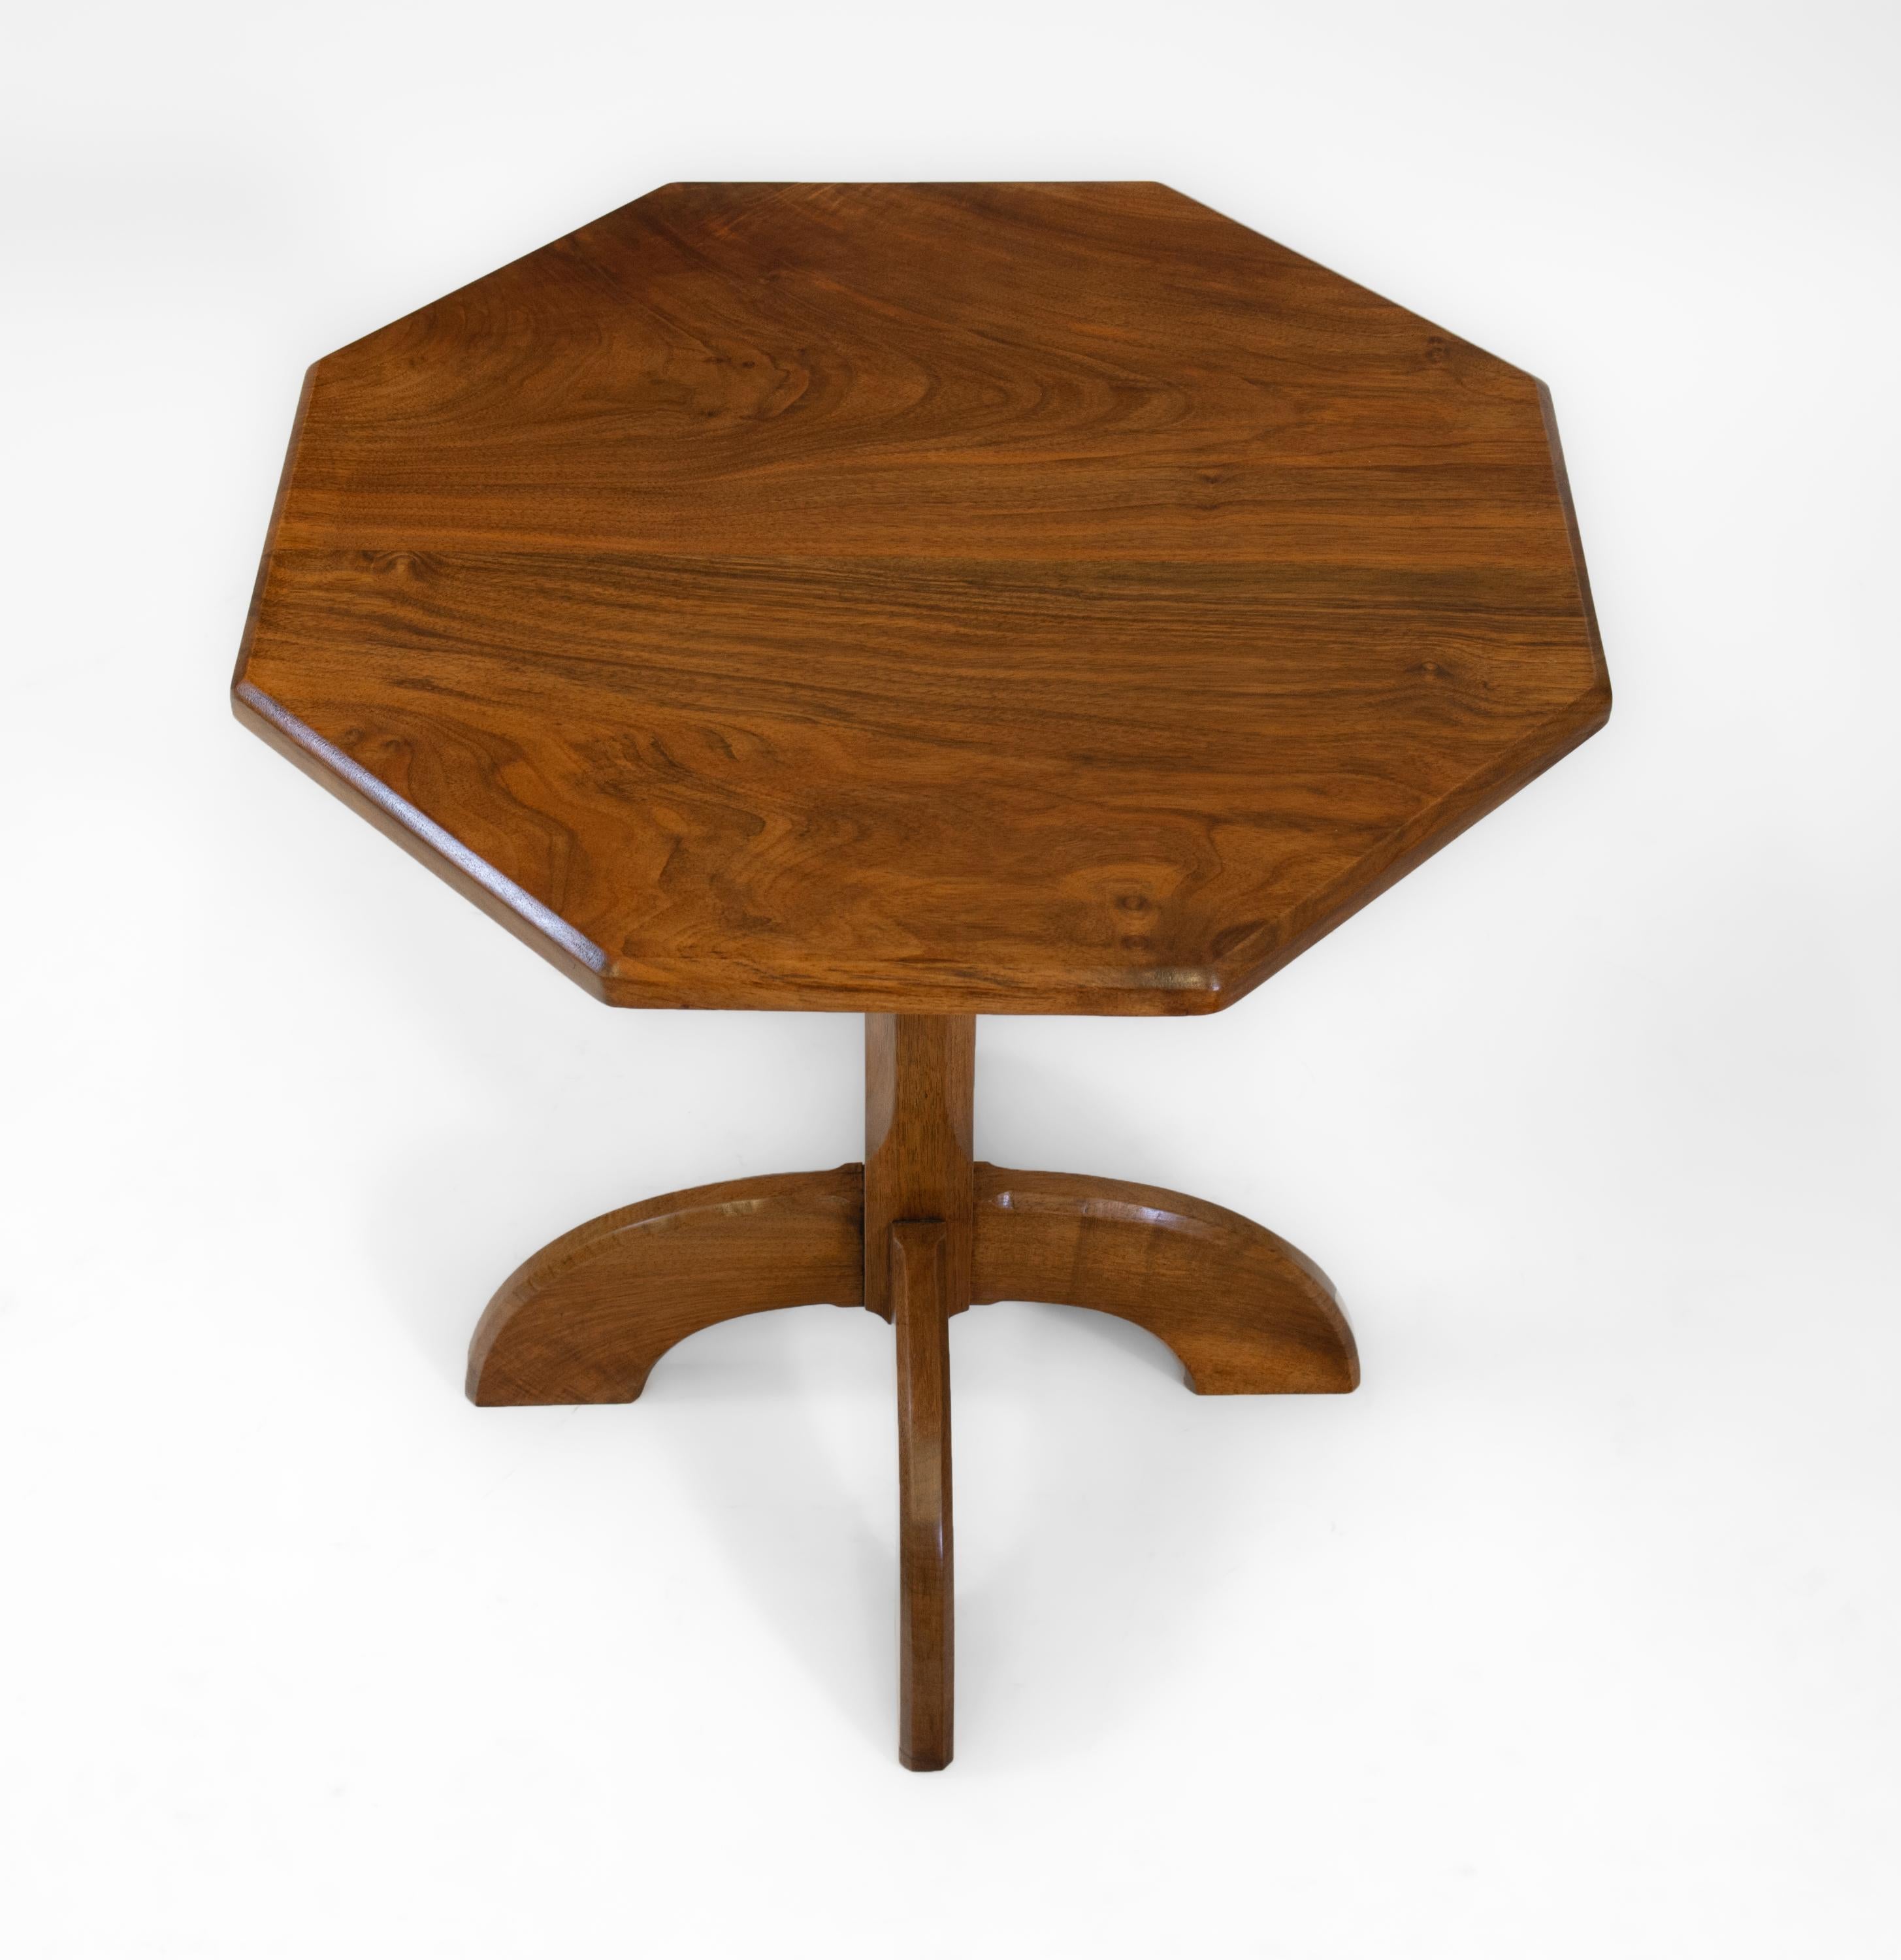 Vintage walnut Cotswold made octagonal side table, 1967.  Cabinet maker's stamp - C H Uzzell, Lewis Lane, Cirencester, MCMLXVII.

Delivery included to the UK mainland.

Constructed in solid English walnut with wonderful figuring to the octagonal